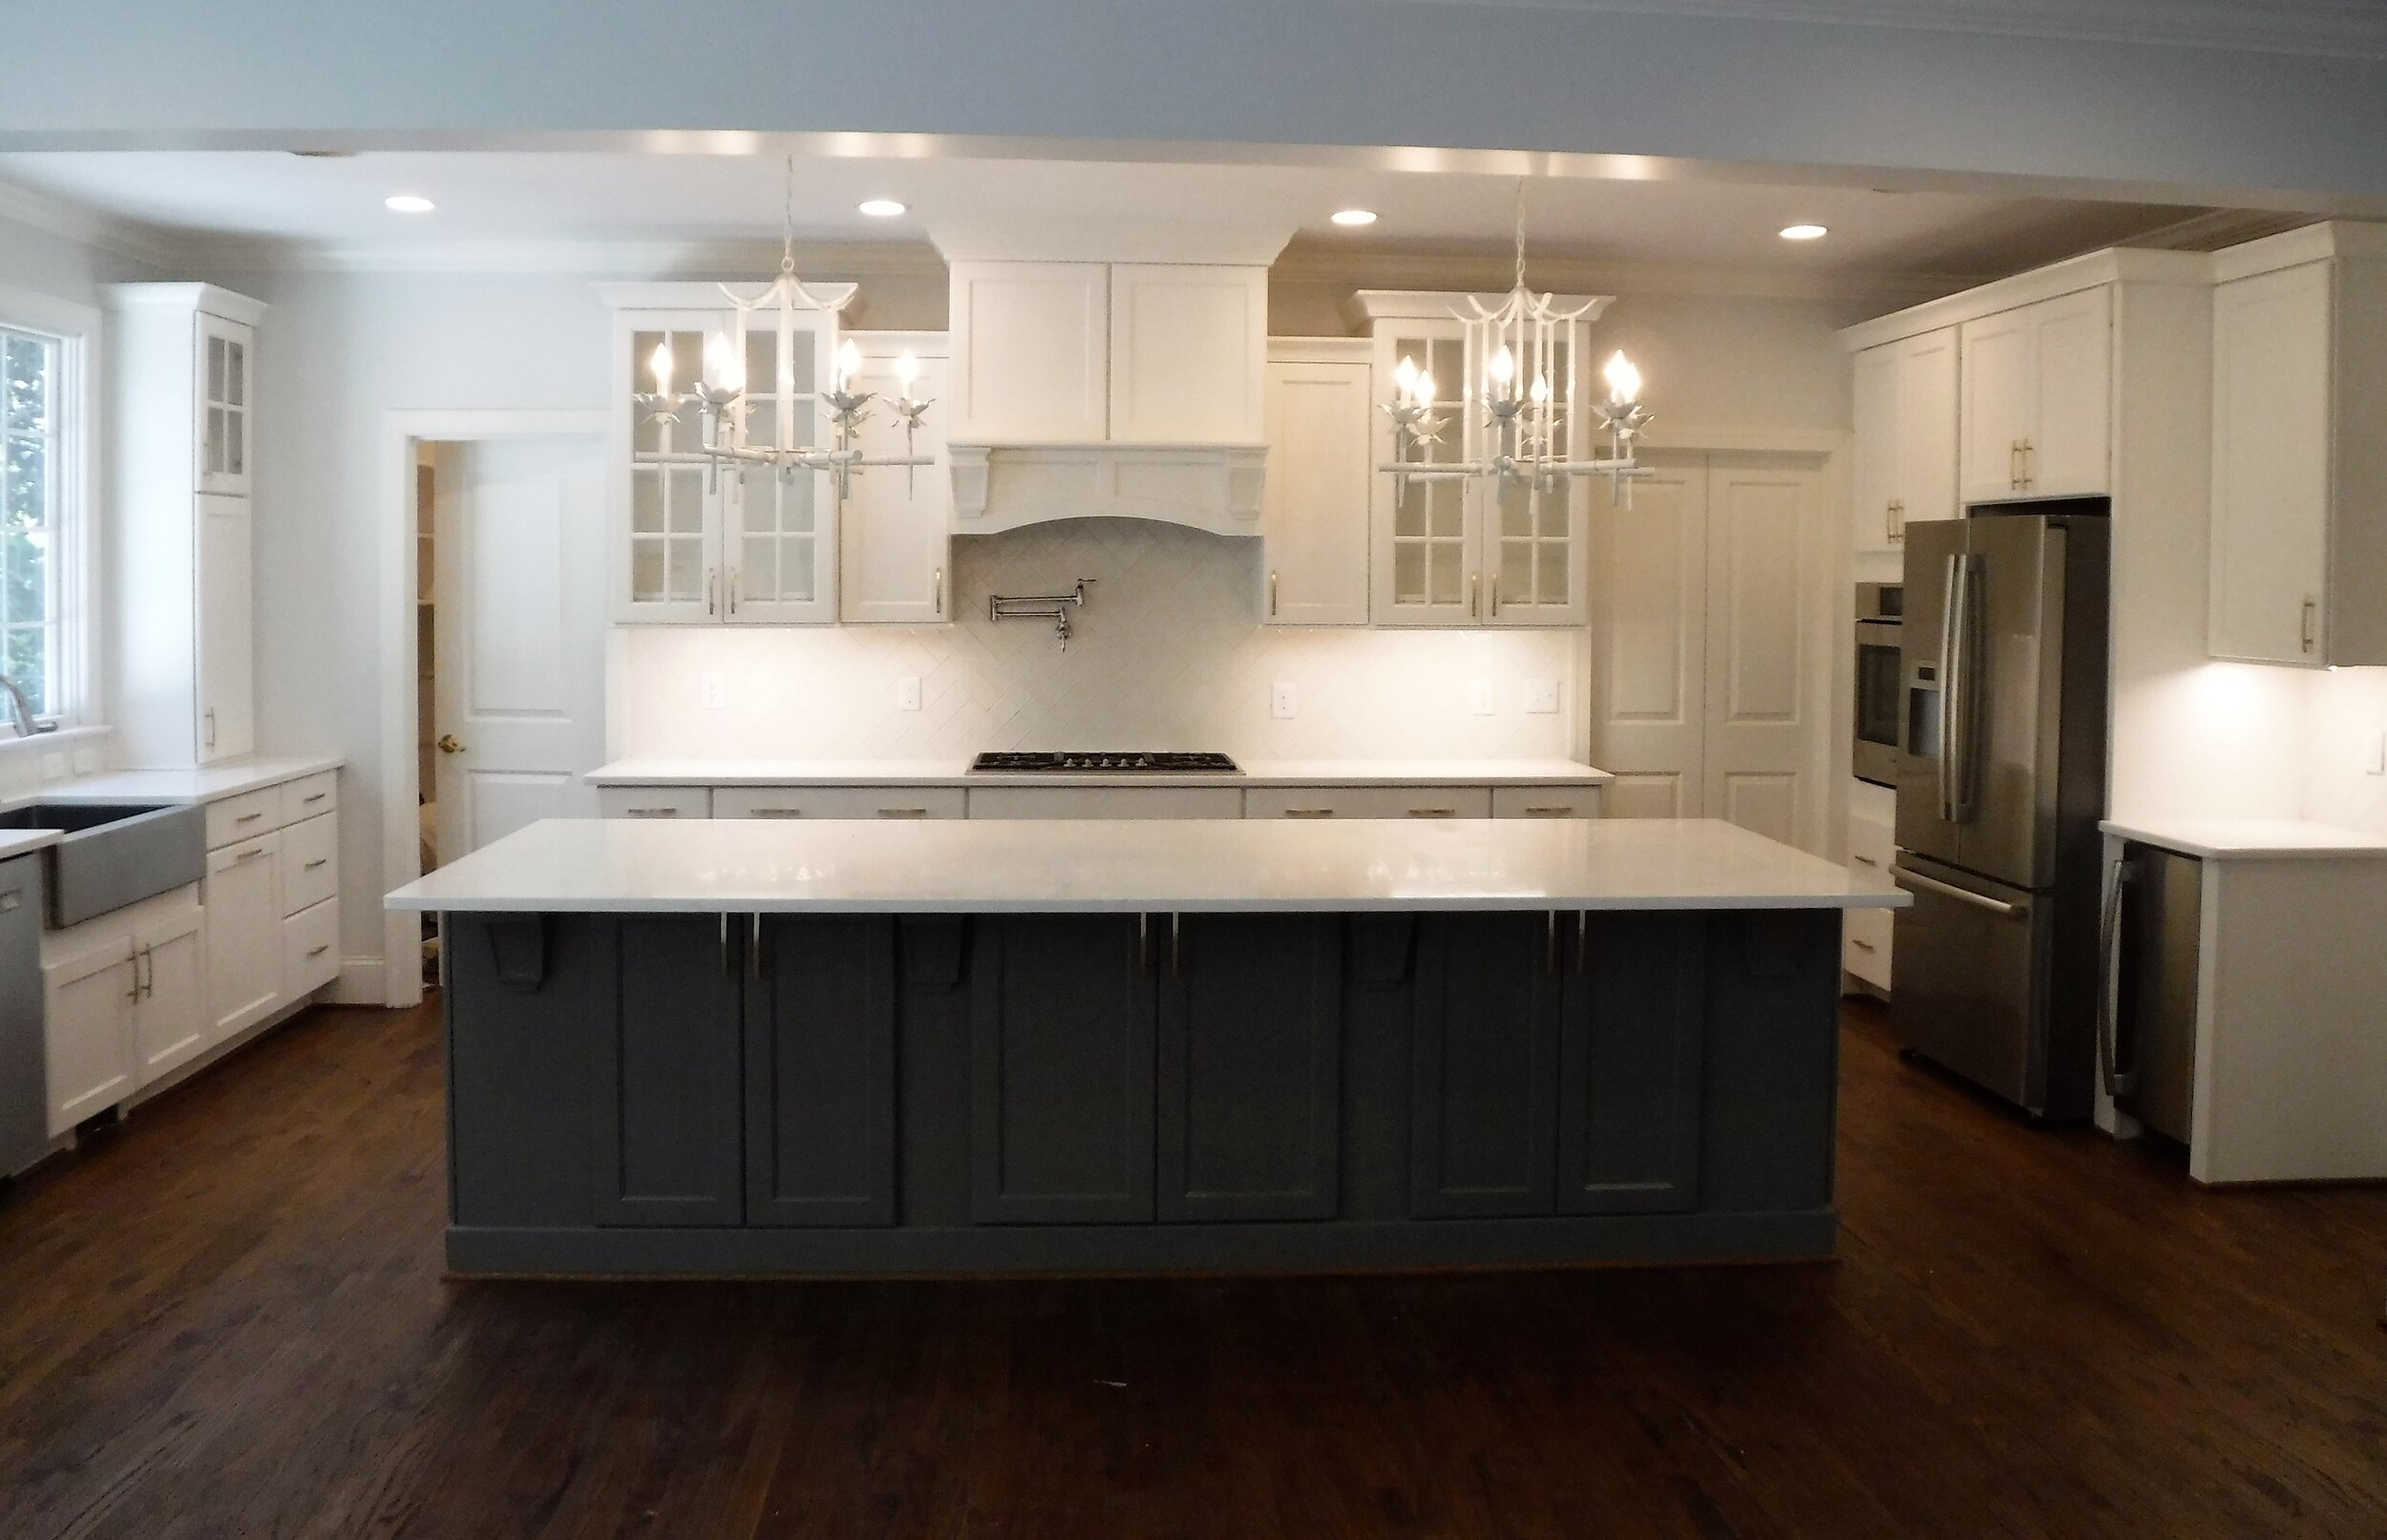 The kitchen includes a large island with seating, quartz countertops, an ice maker and plenty of room for entertaining.